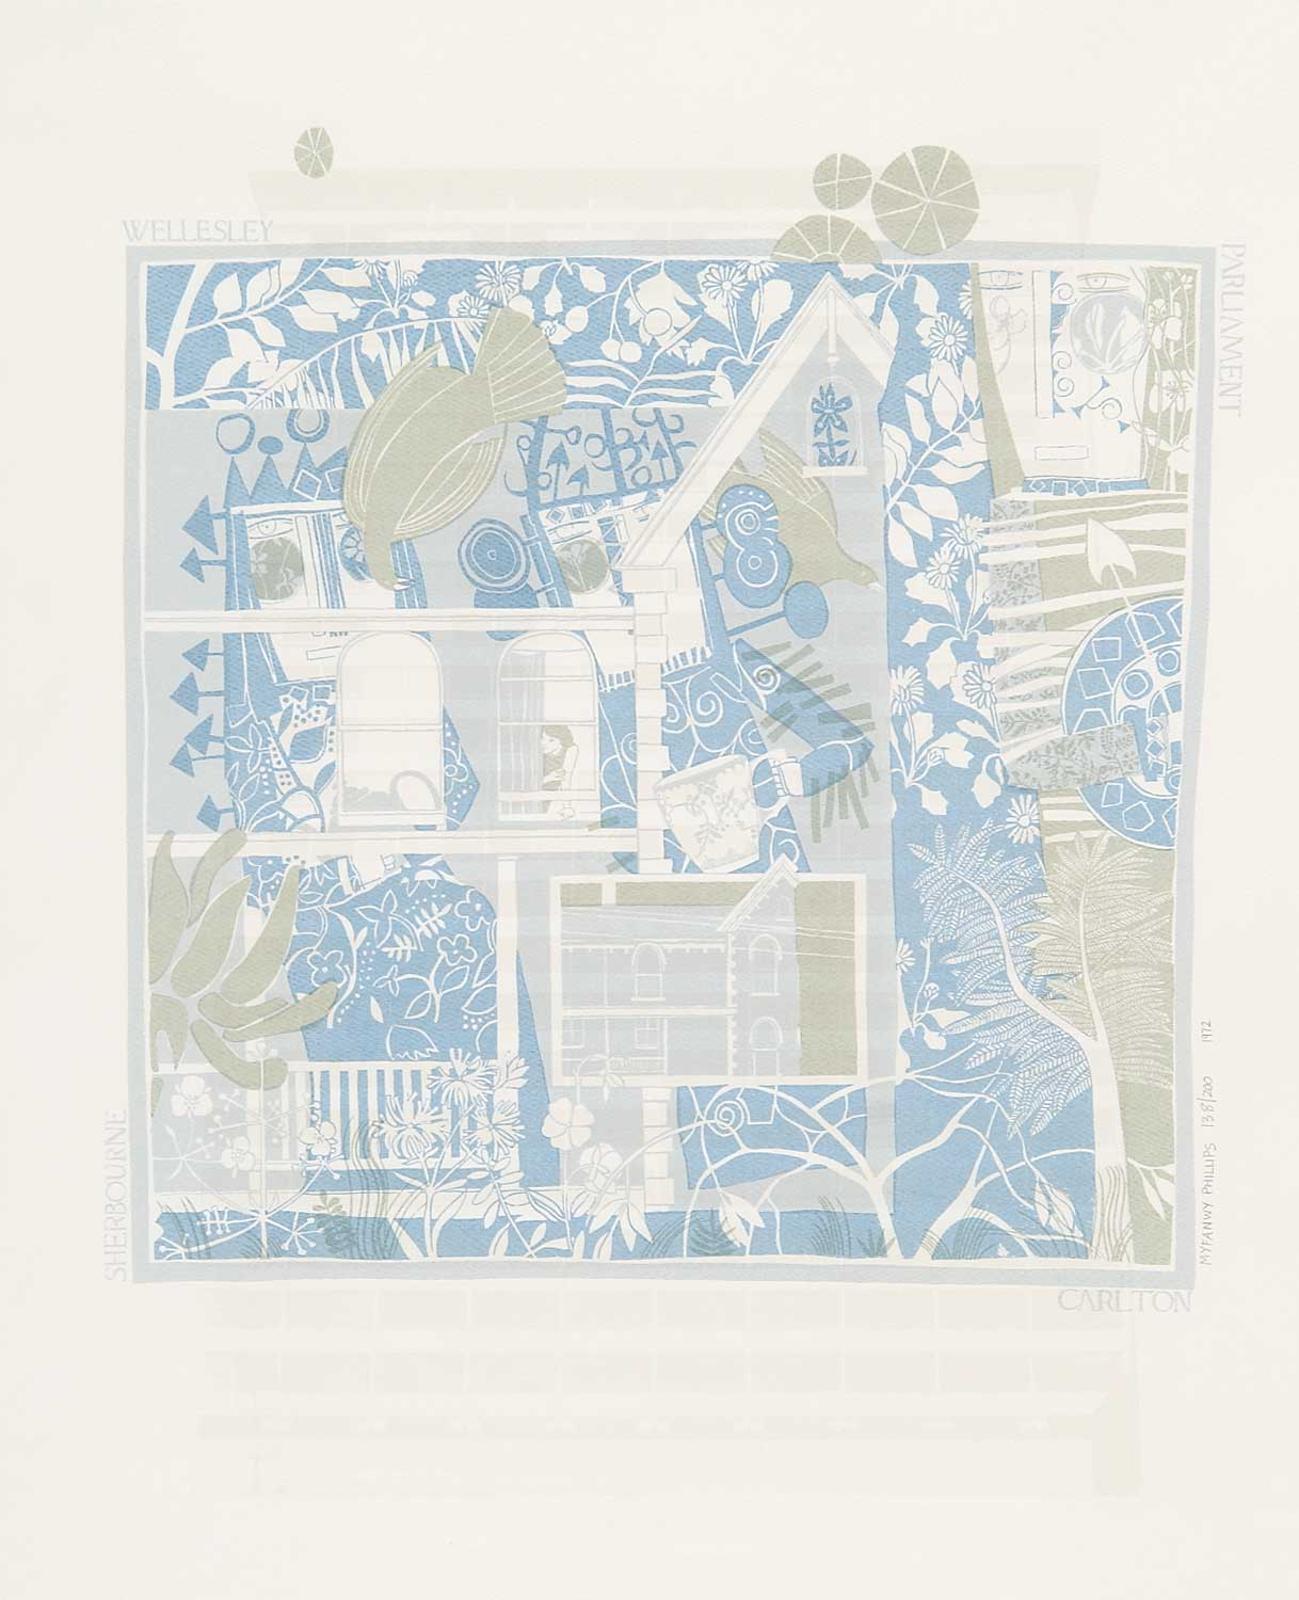 Myfanwy Phillips - Untitled - Wellesley, Parliament, Calton, Sherbourne  #138/200